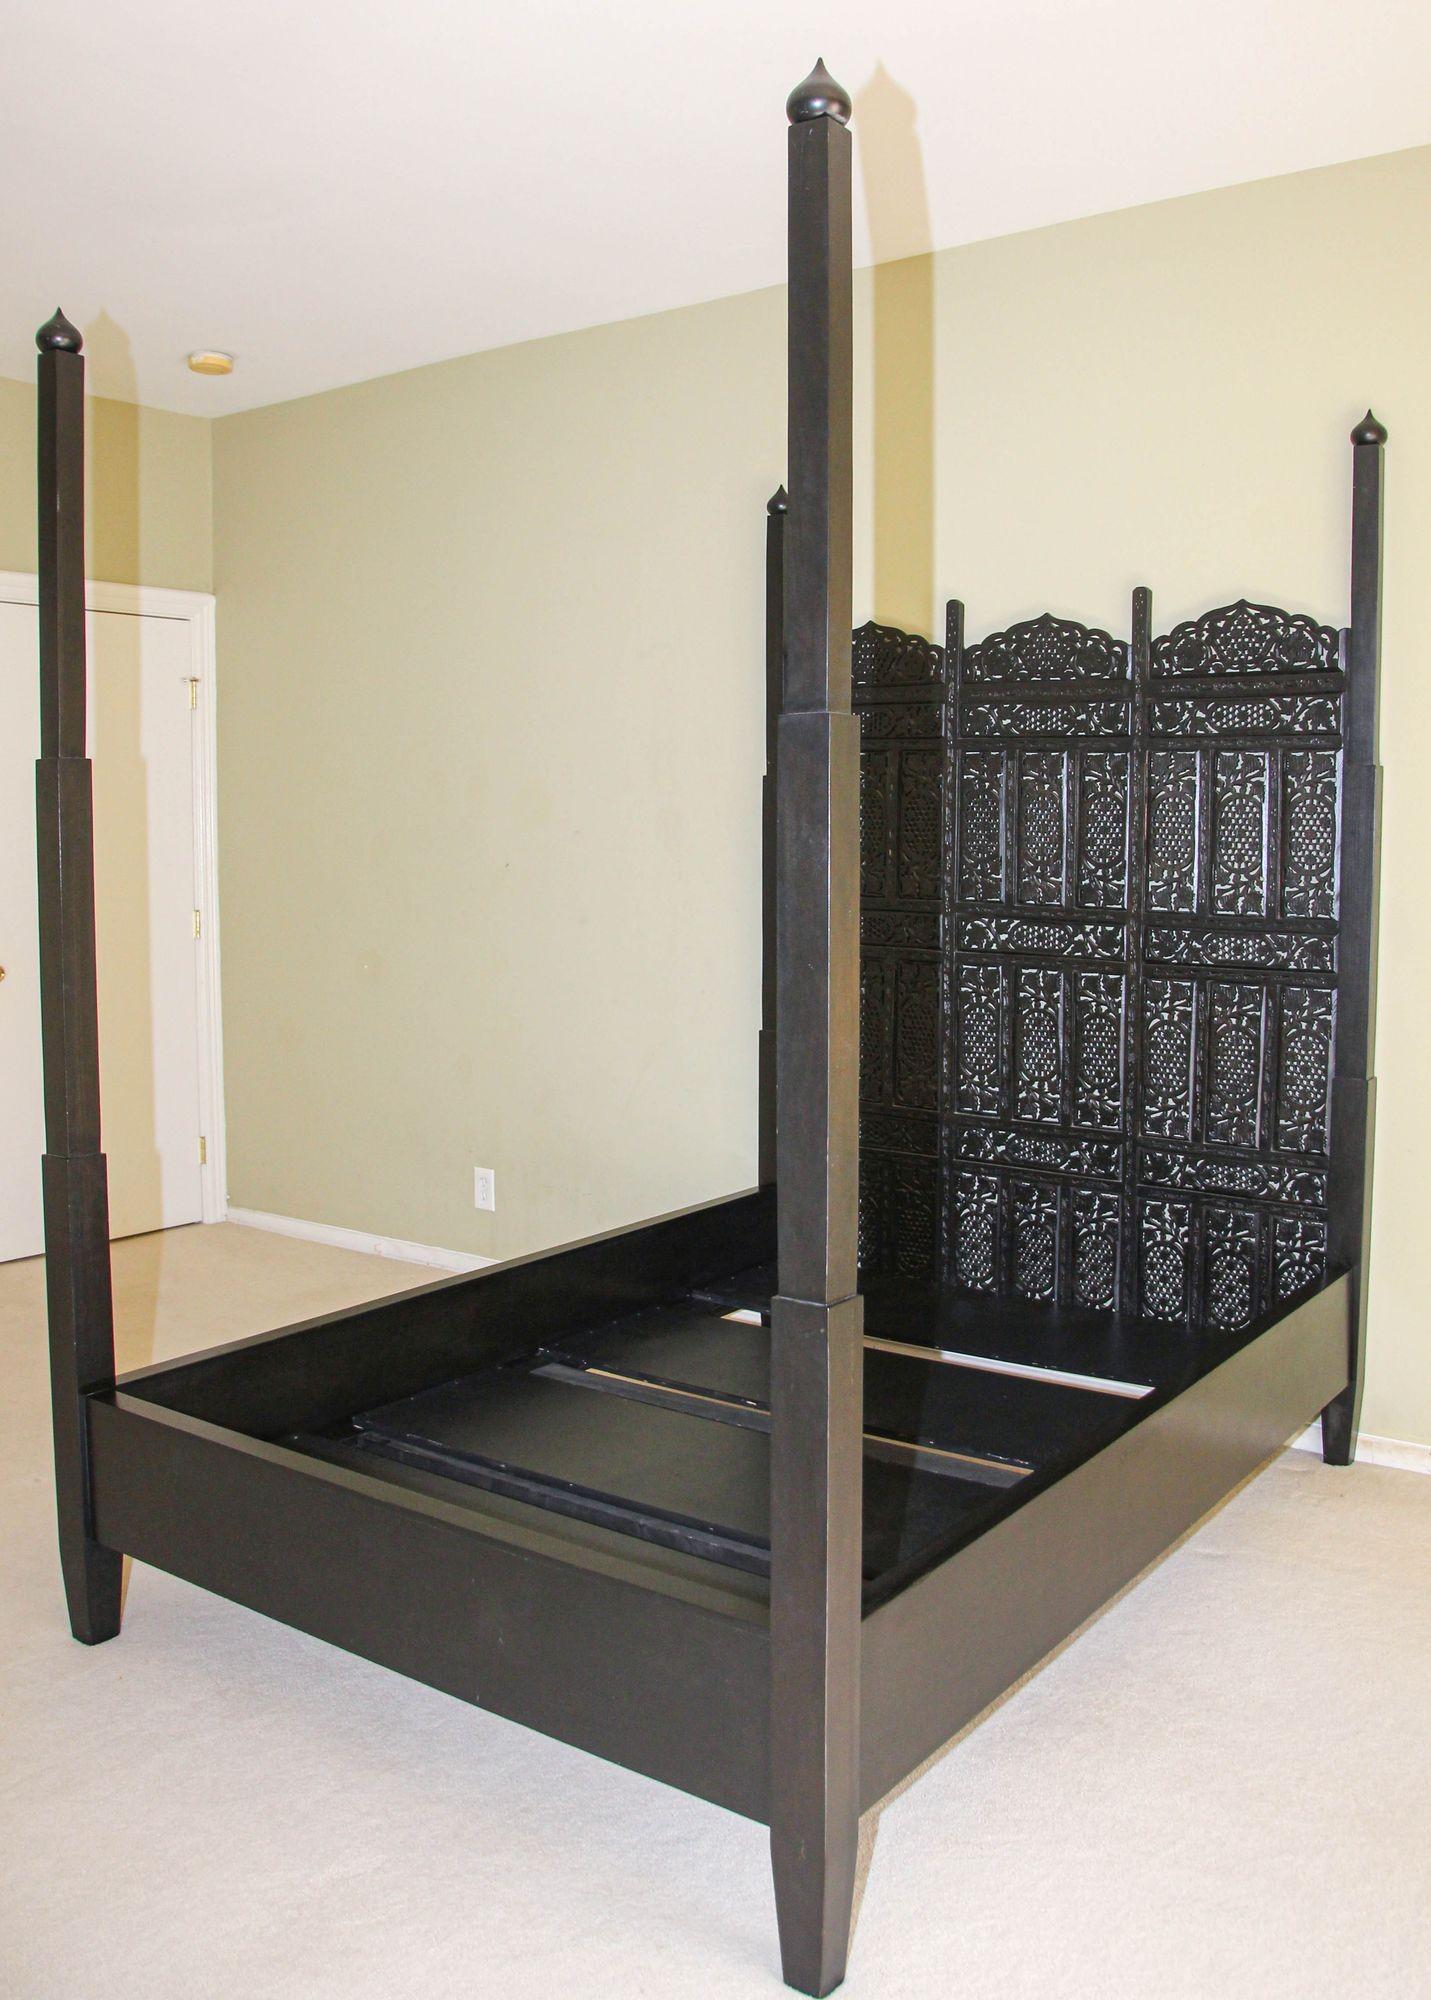 Indo Portuguese Mughal Raj queen Bed, Anglo Indian hand-carved Bed.
Baroque Lisbon style queen four poster bed in ebony dark black finish.
Often known as a Raj bed, the bed is hand made by craftsmen and carvers in India.
The head of the bed has